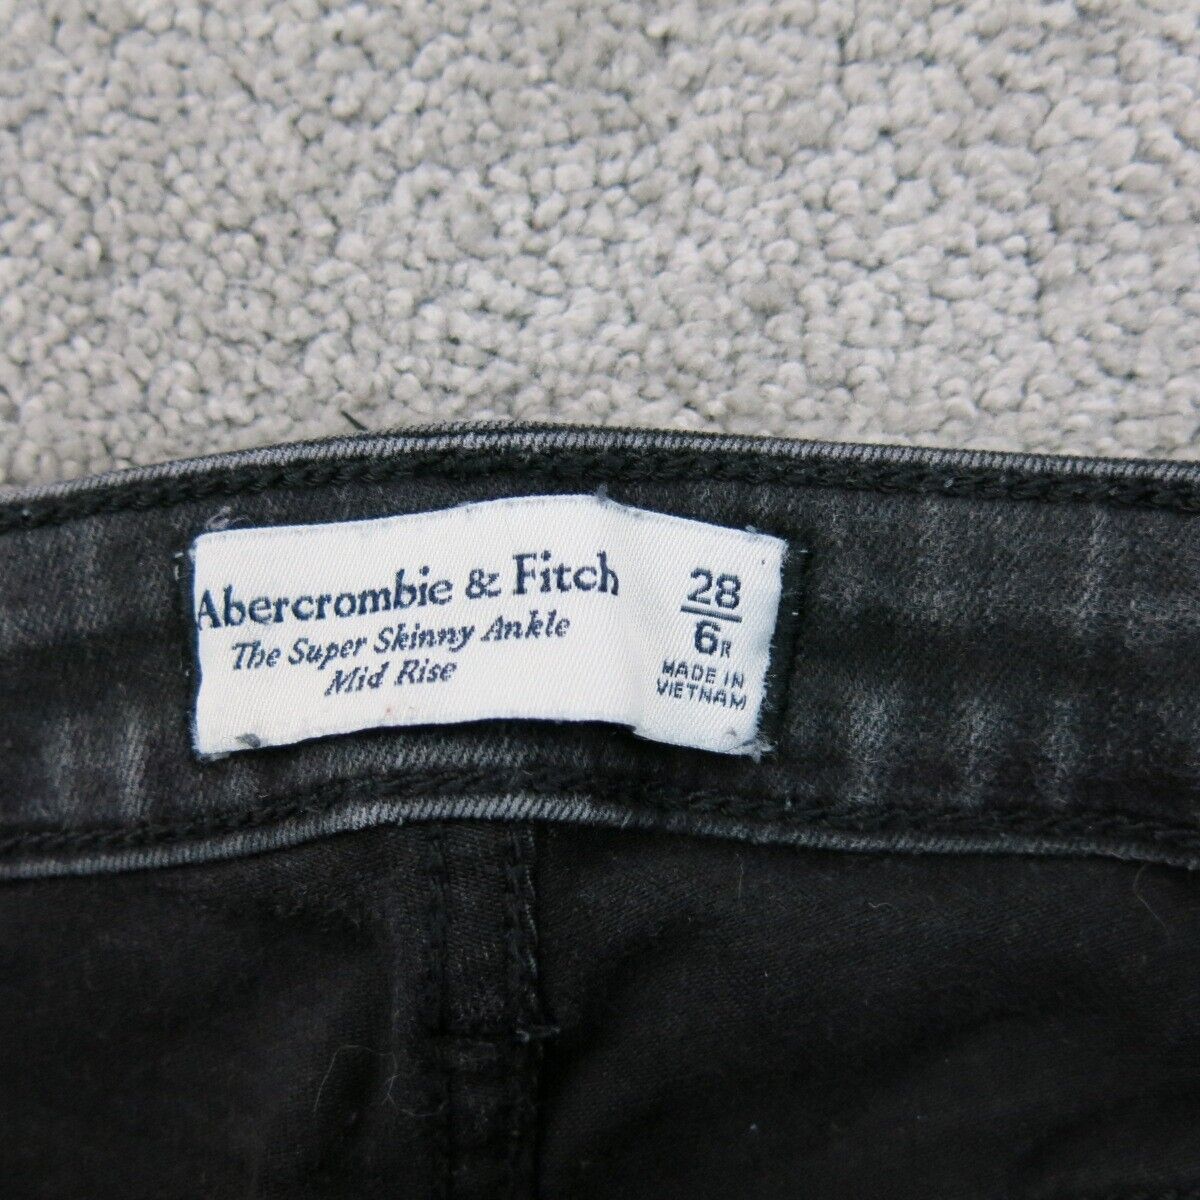 Abercrombie & Fitch Women The Super Skinny Ankle Jeans Distressed Black SZ 28/6R